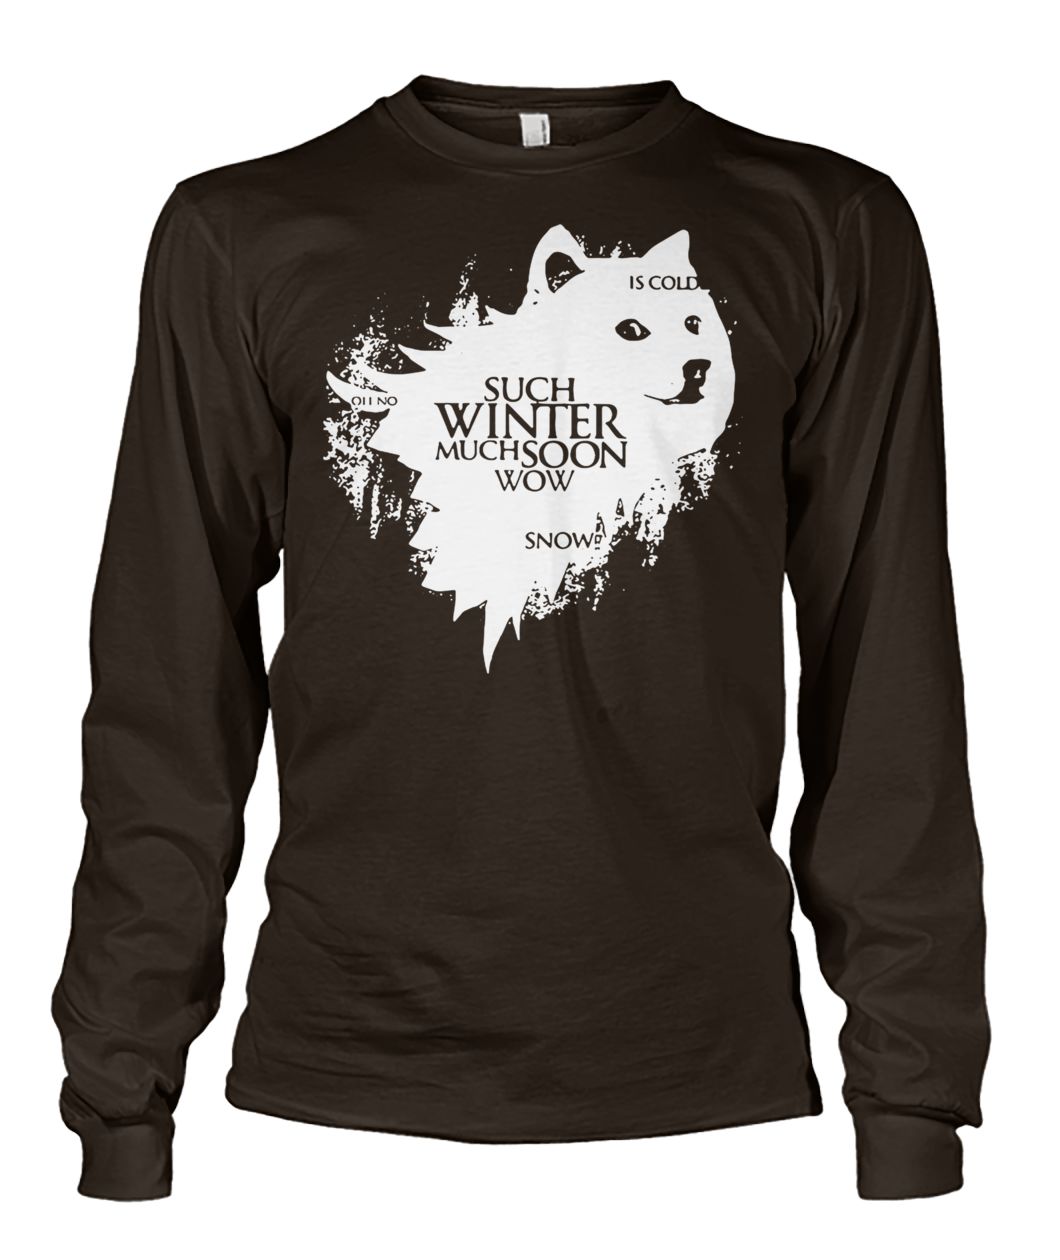 Game of thrones doge oh no such winter much soon wow snow is cold unisex long sleeve